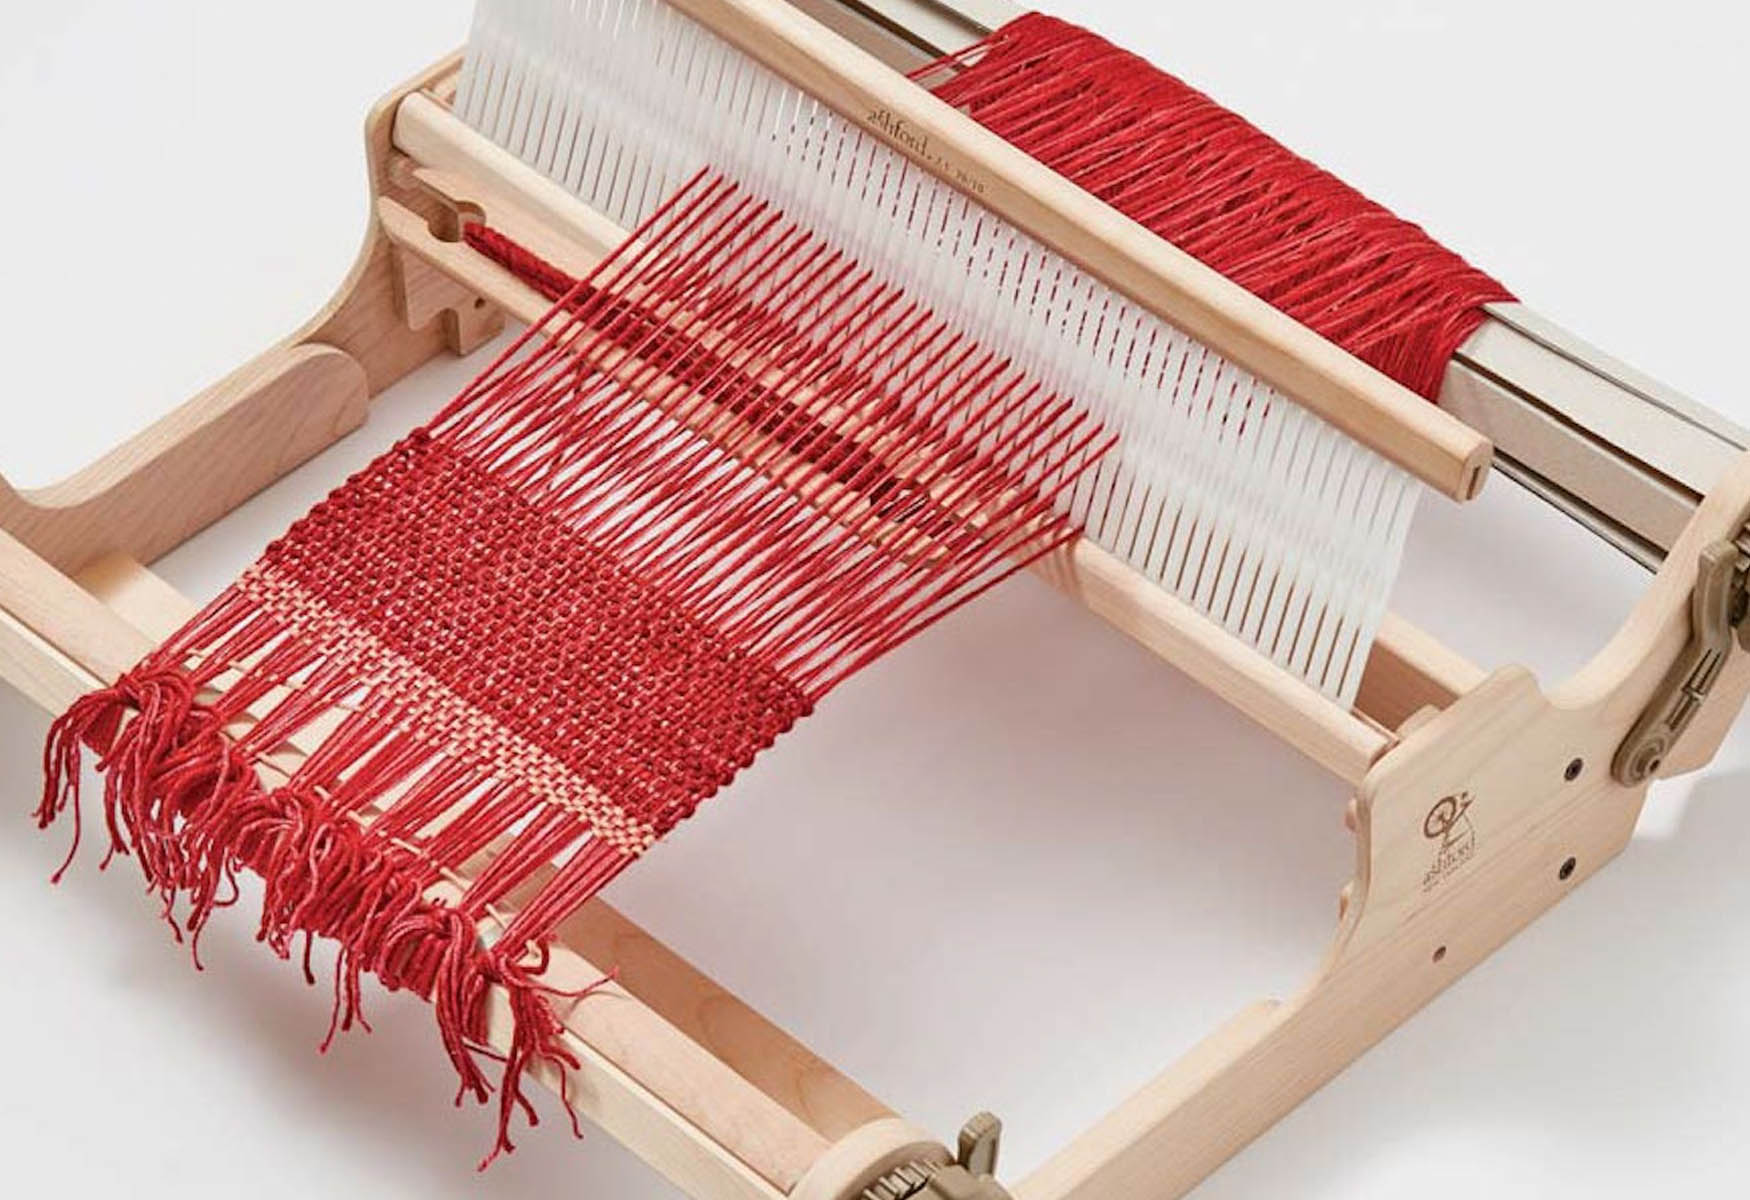 18-surprising-facts-about-loom-weaving